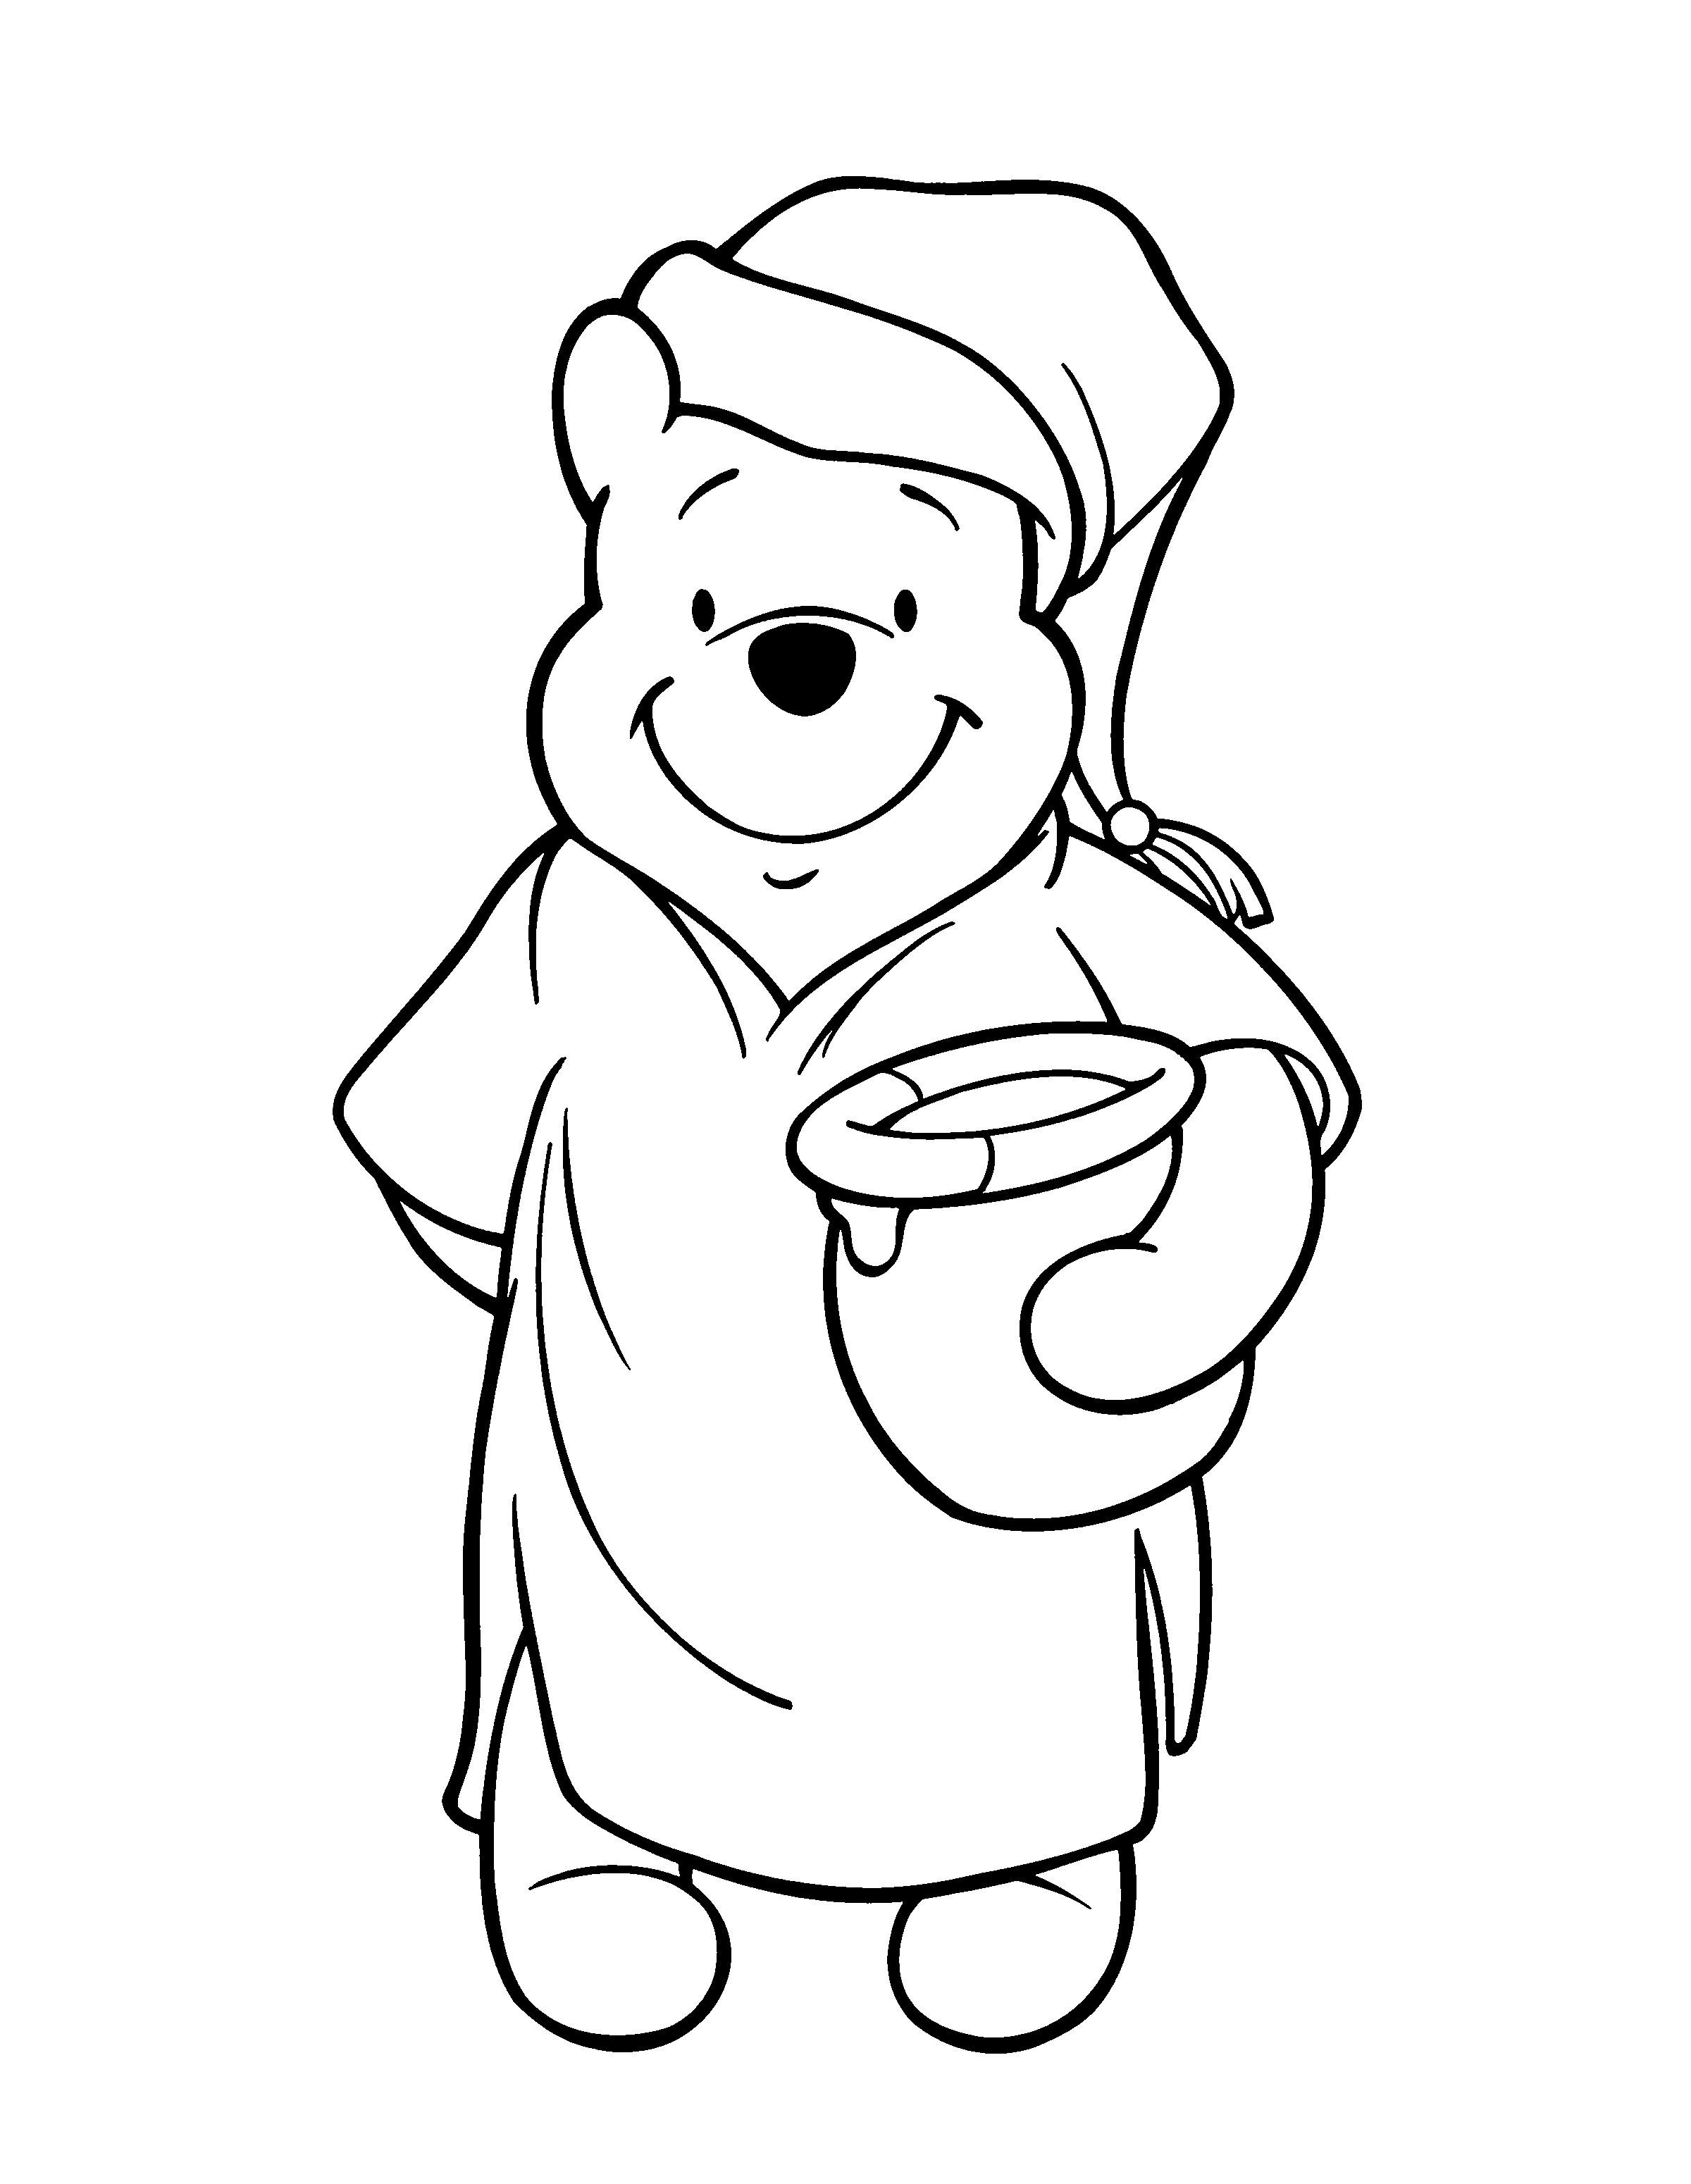 Sleeptime Winnie The Pooh Coloring Pages